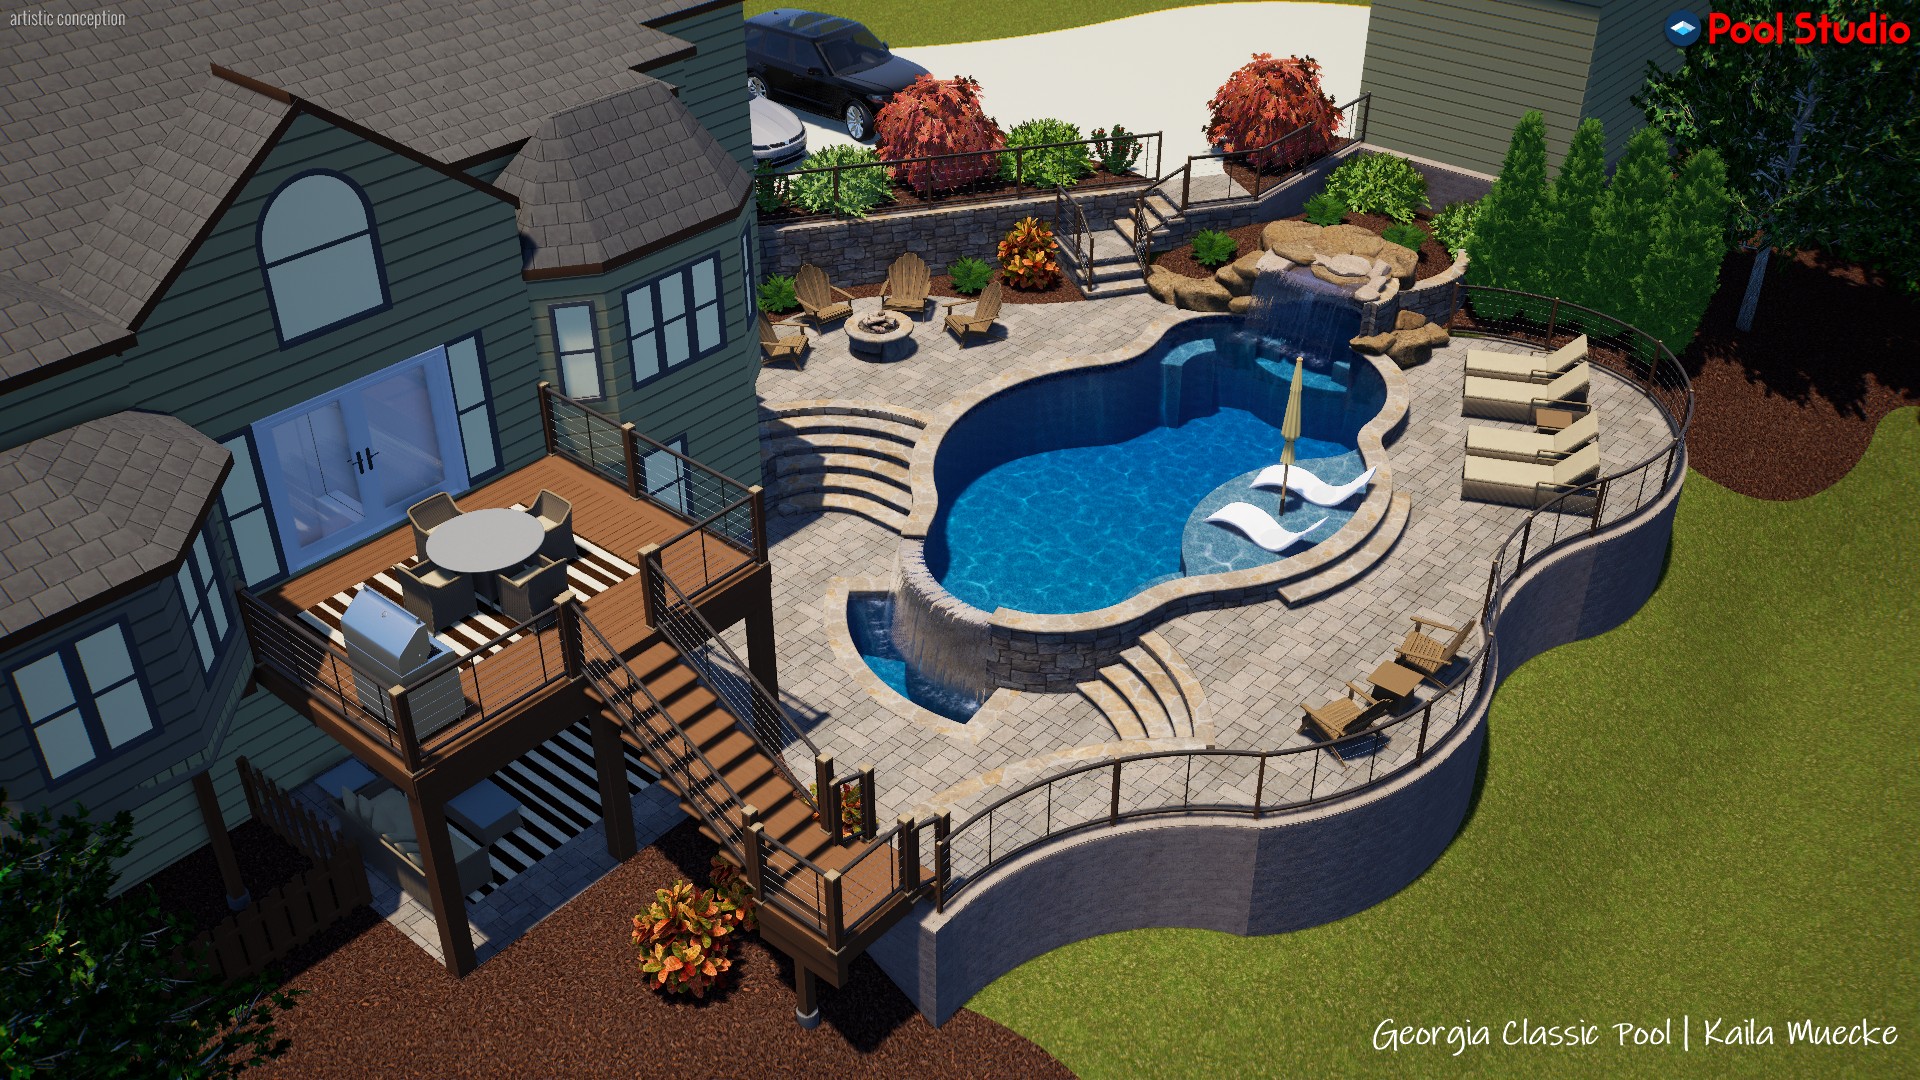 A breathtaking 3D swimming pool design featuring a vanishing edge, a cascading waterfall, and a sunken kitchen nestled below the deck.